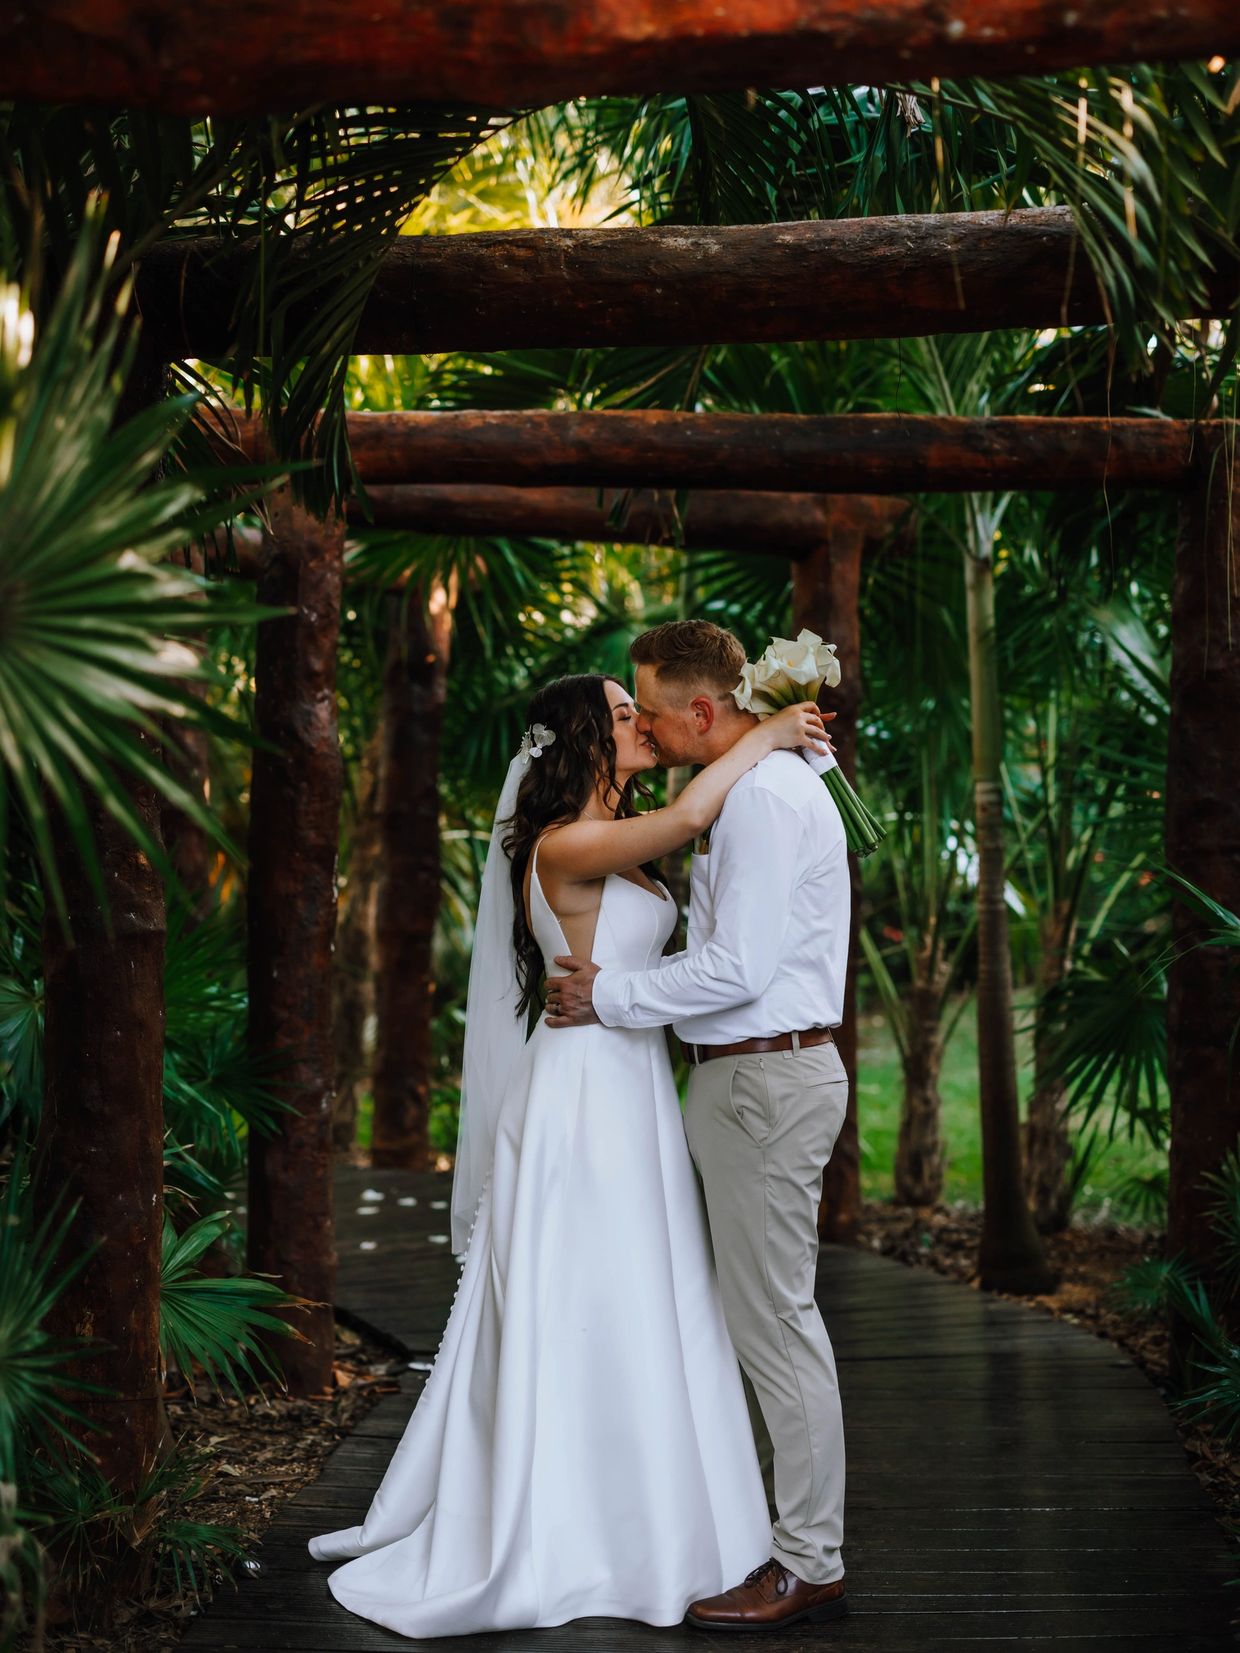 Destination wedding in Mexico. Bride and groom kissing in tropical forest!